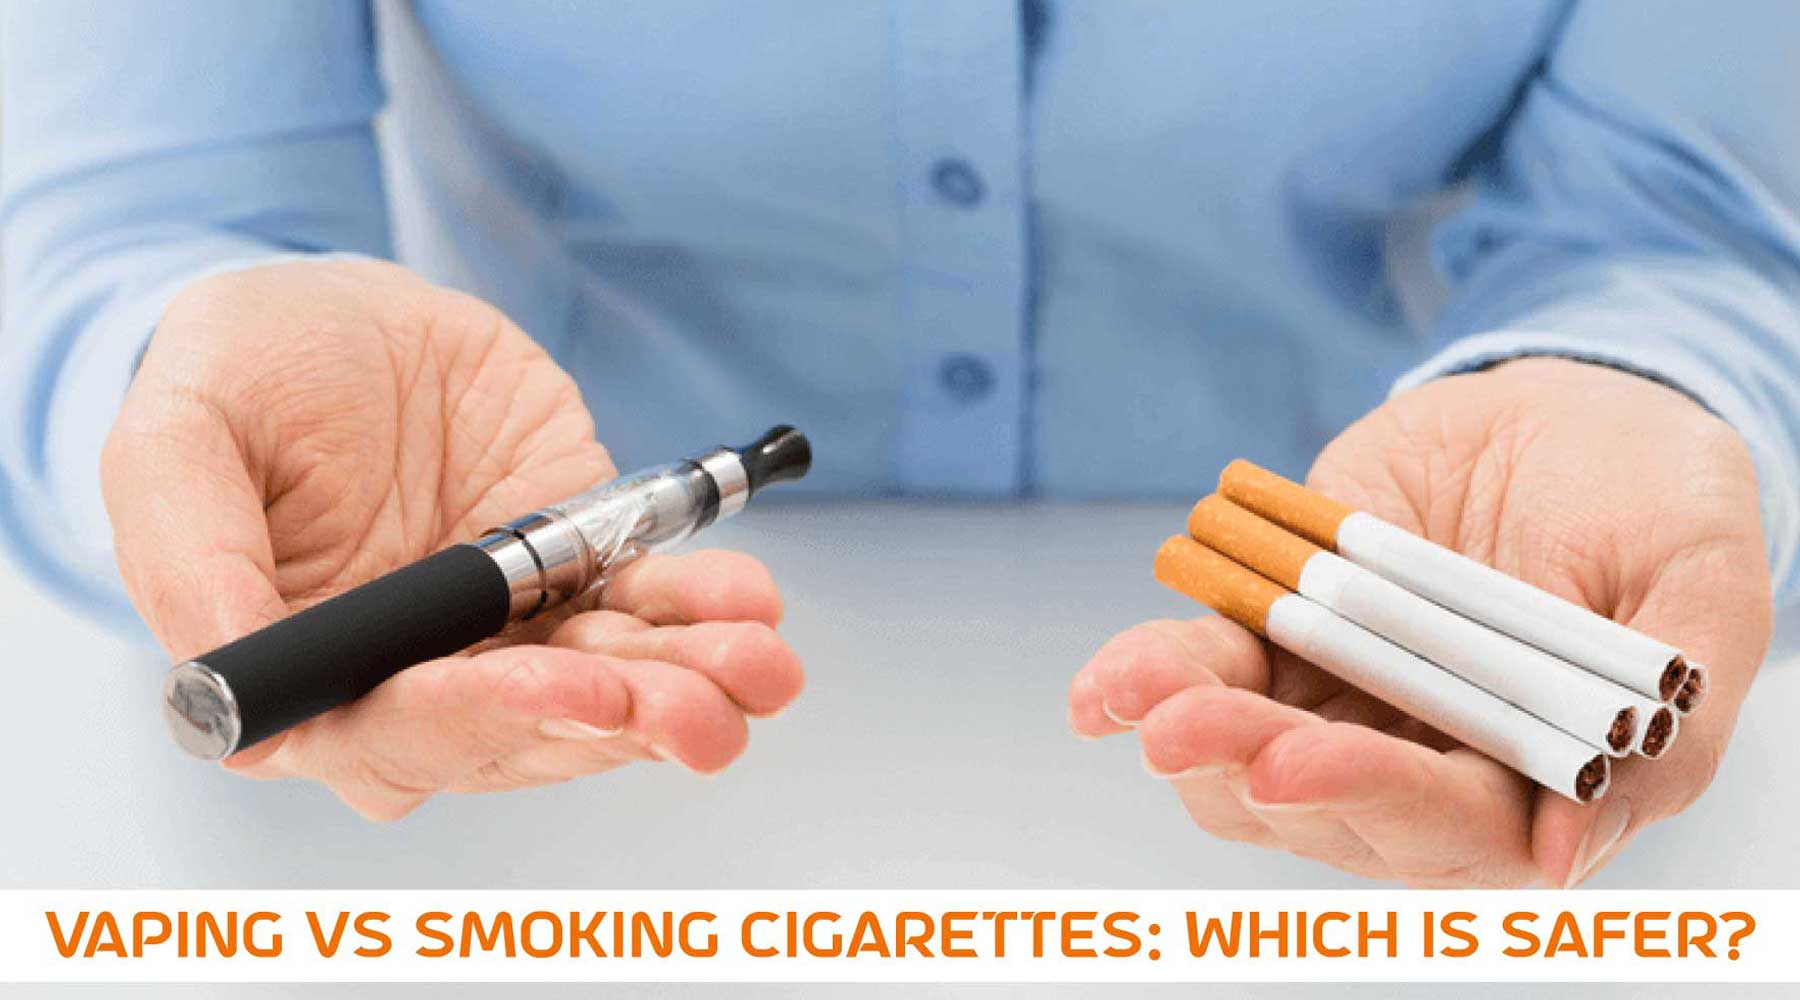 Vaping vs Smoking Cigarettes: Which is Safer?